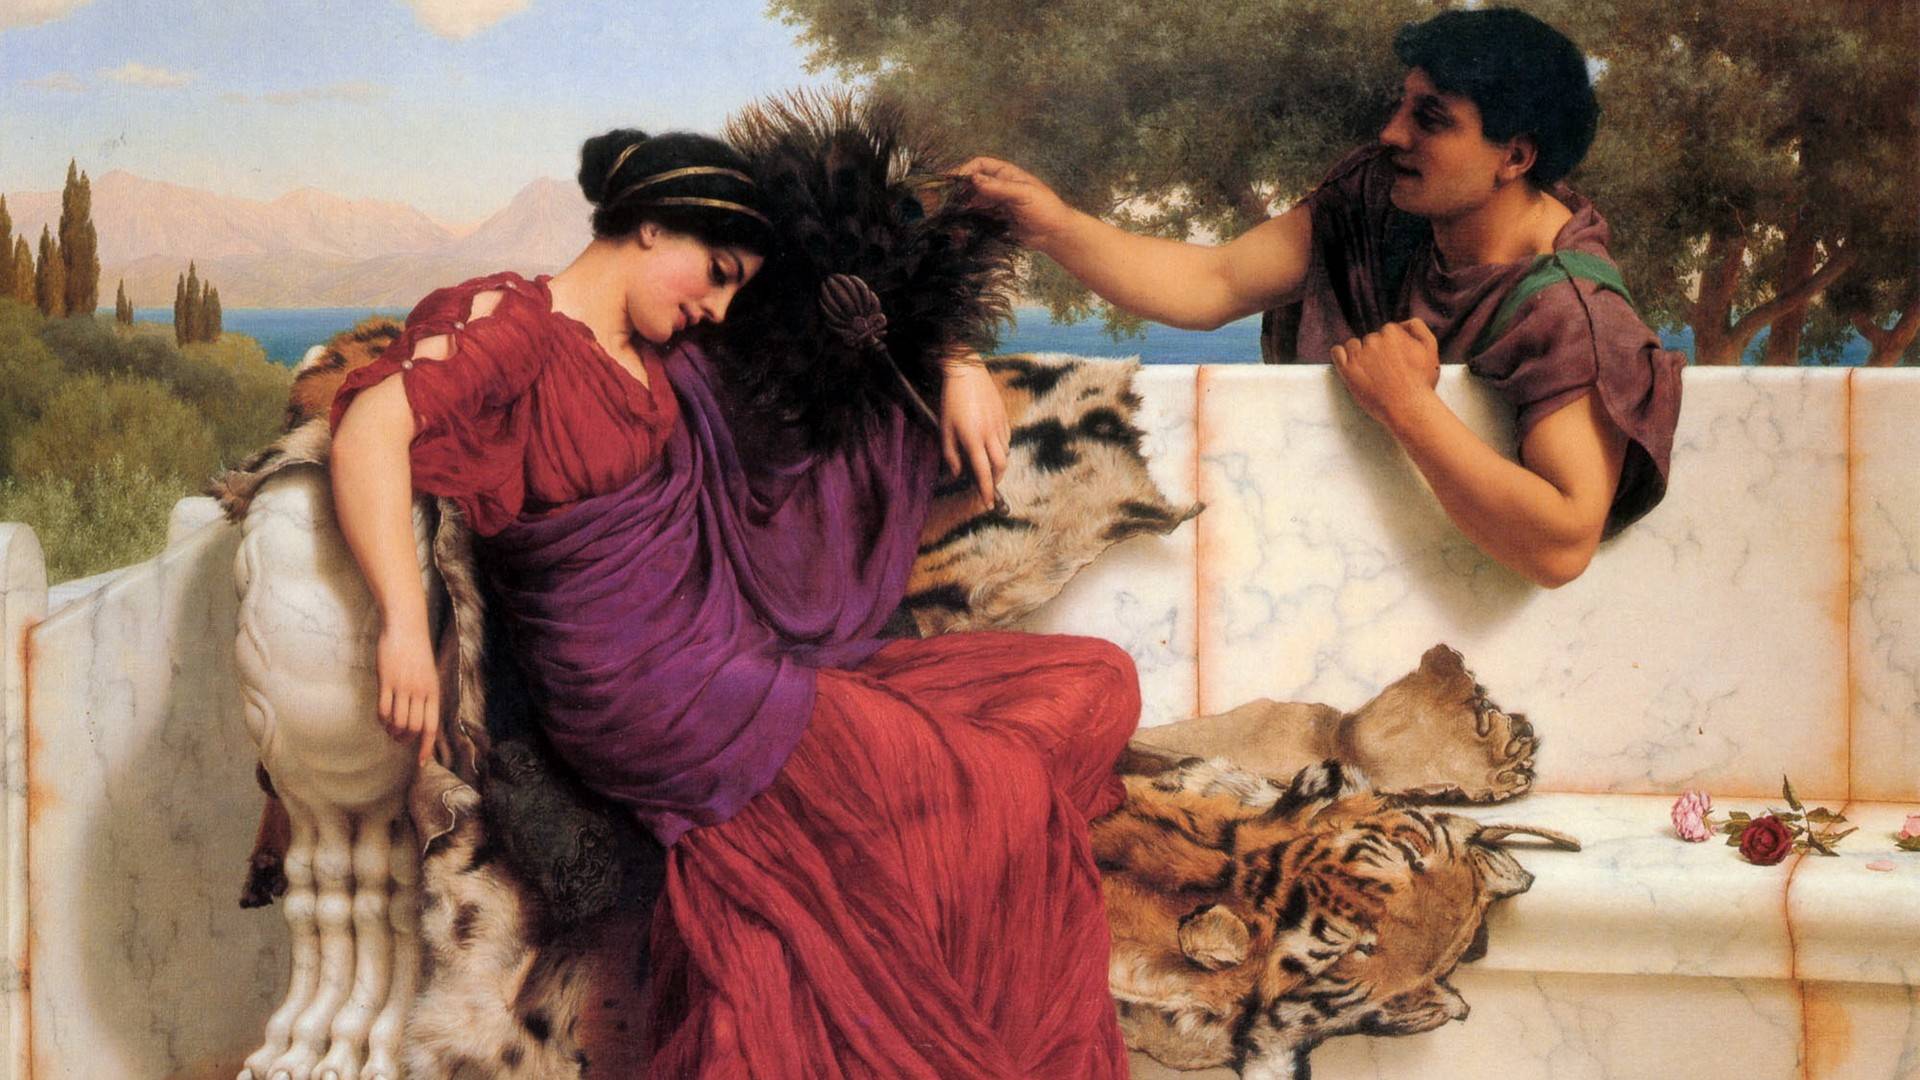 The Old, Old Story by John William Godward - 1903 - 71.5 x 86.5 cm private collection